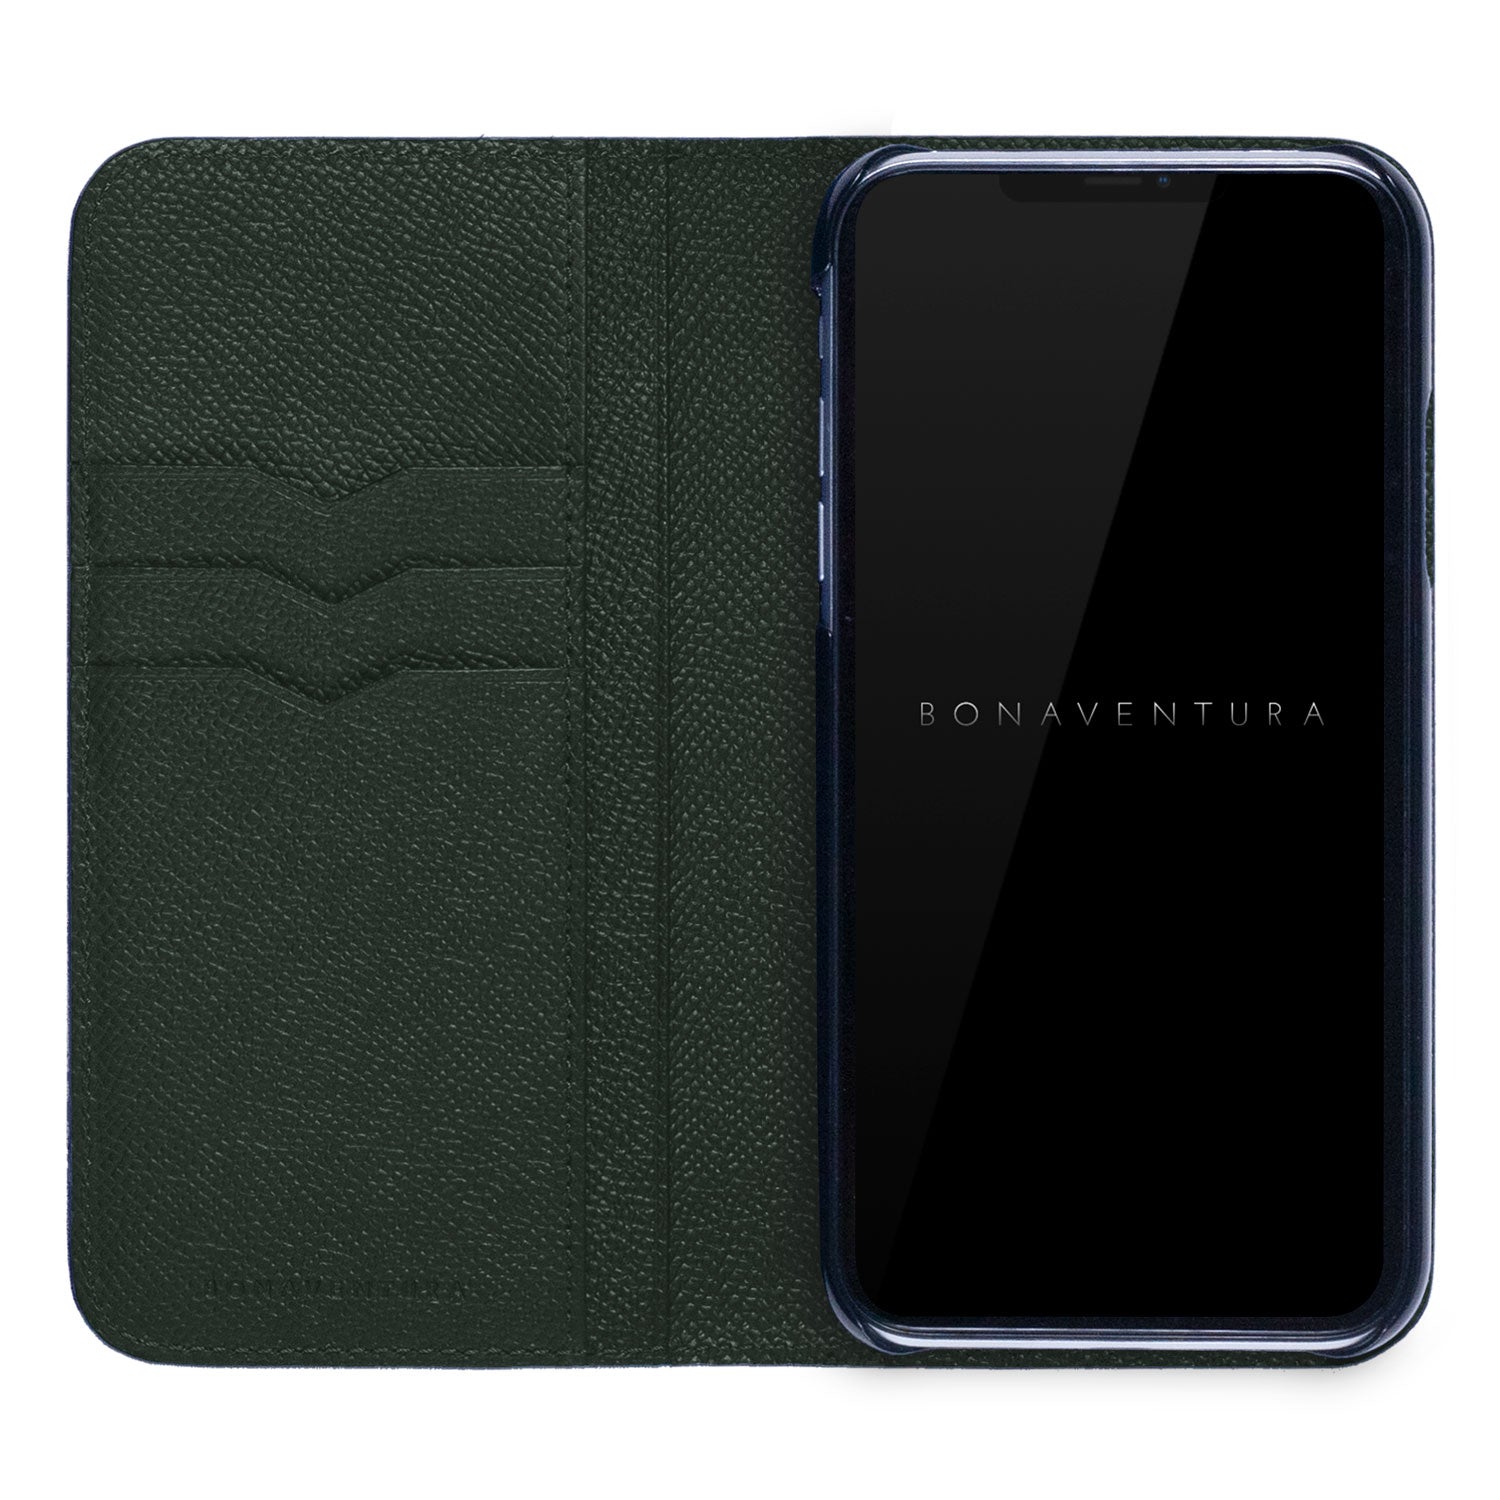 (iPhone 11) Diary Case Noblesse Leather